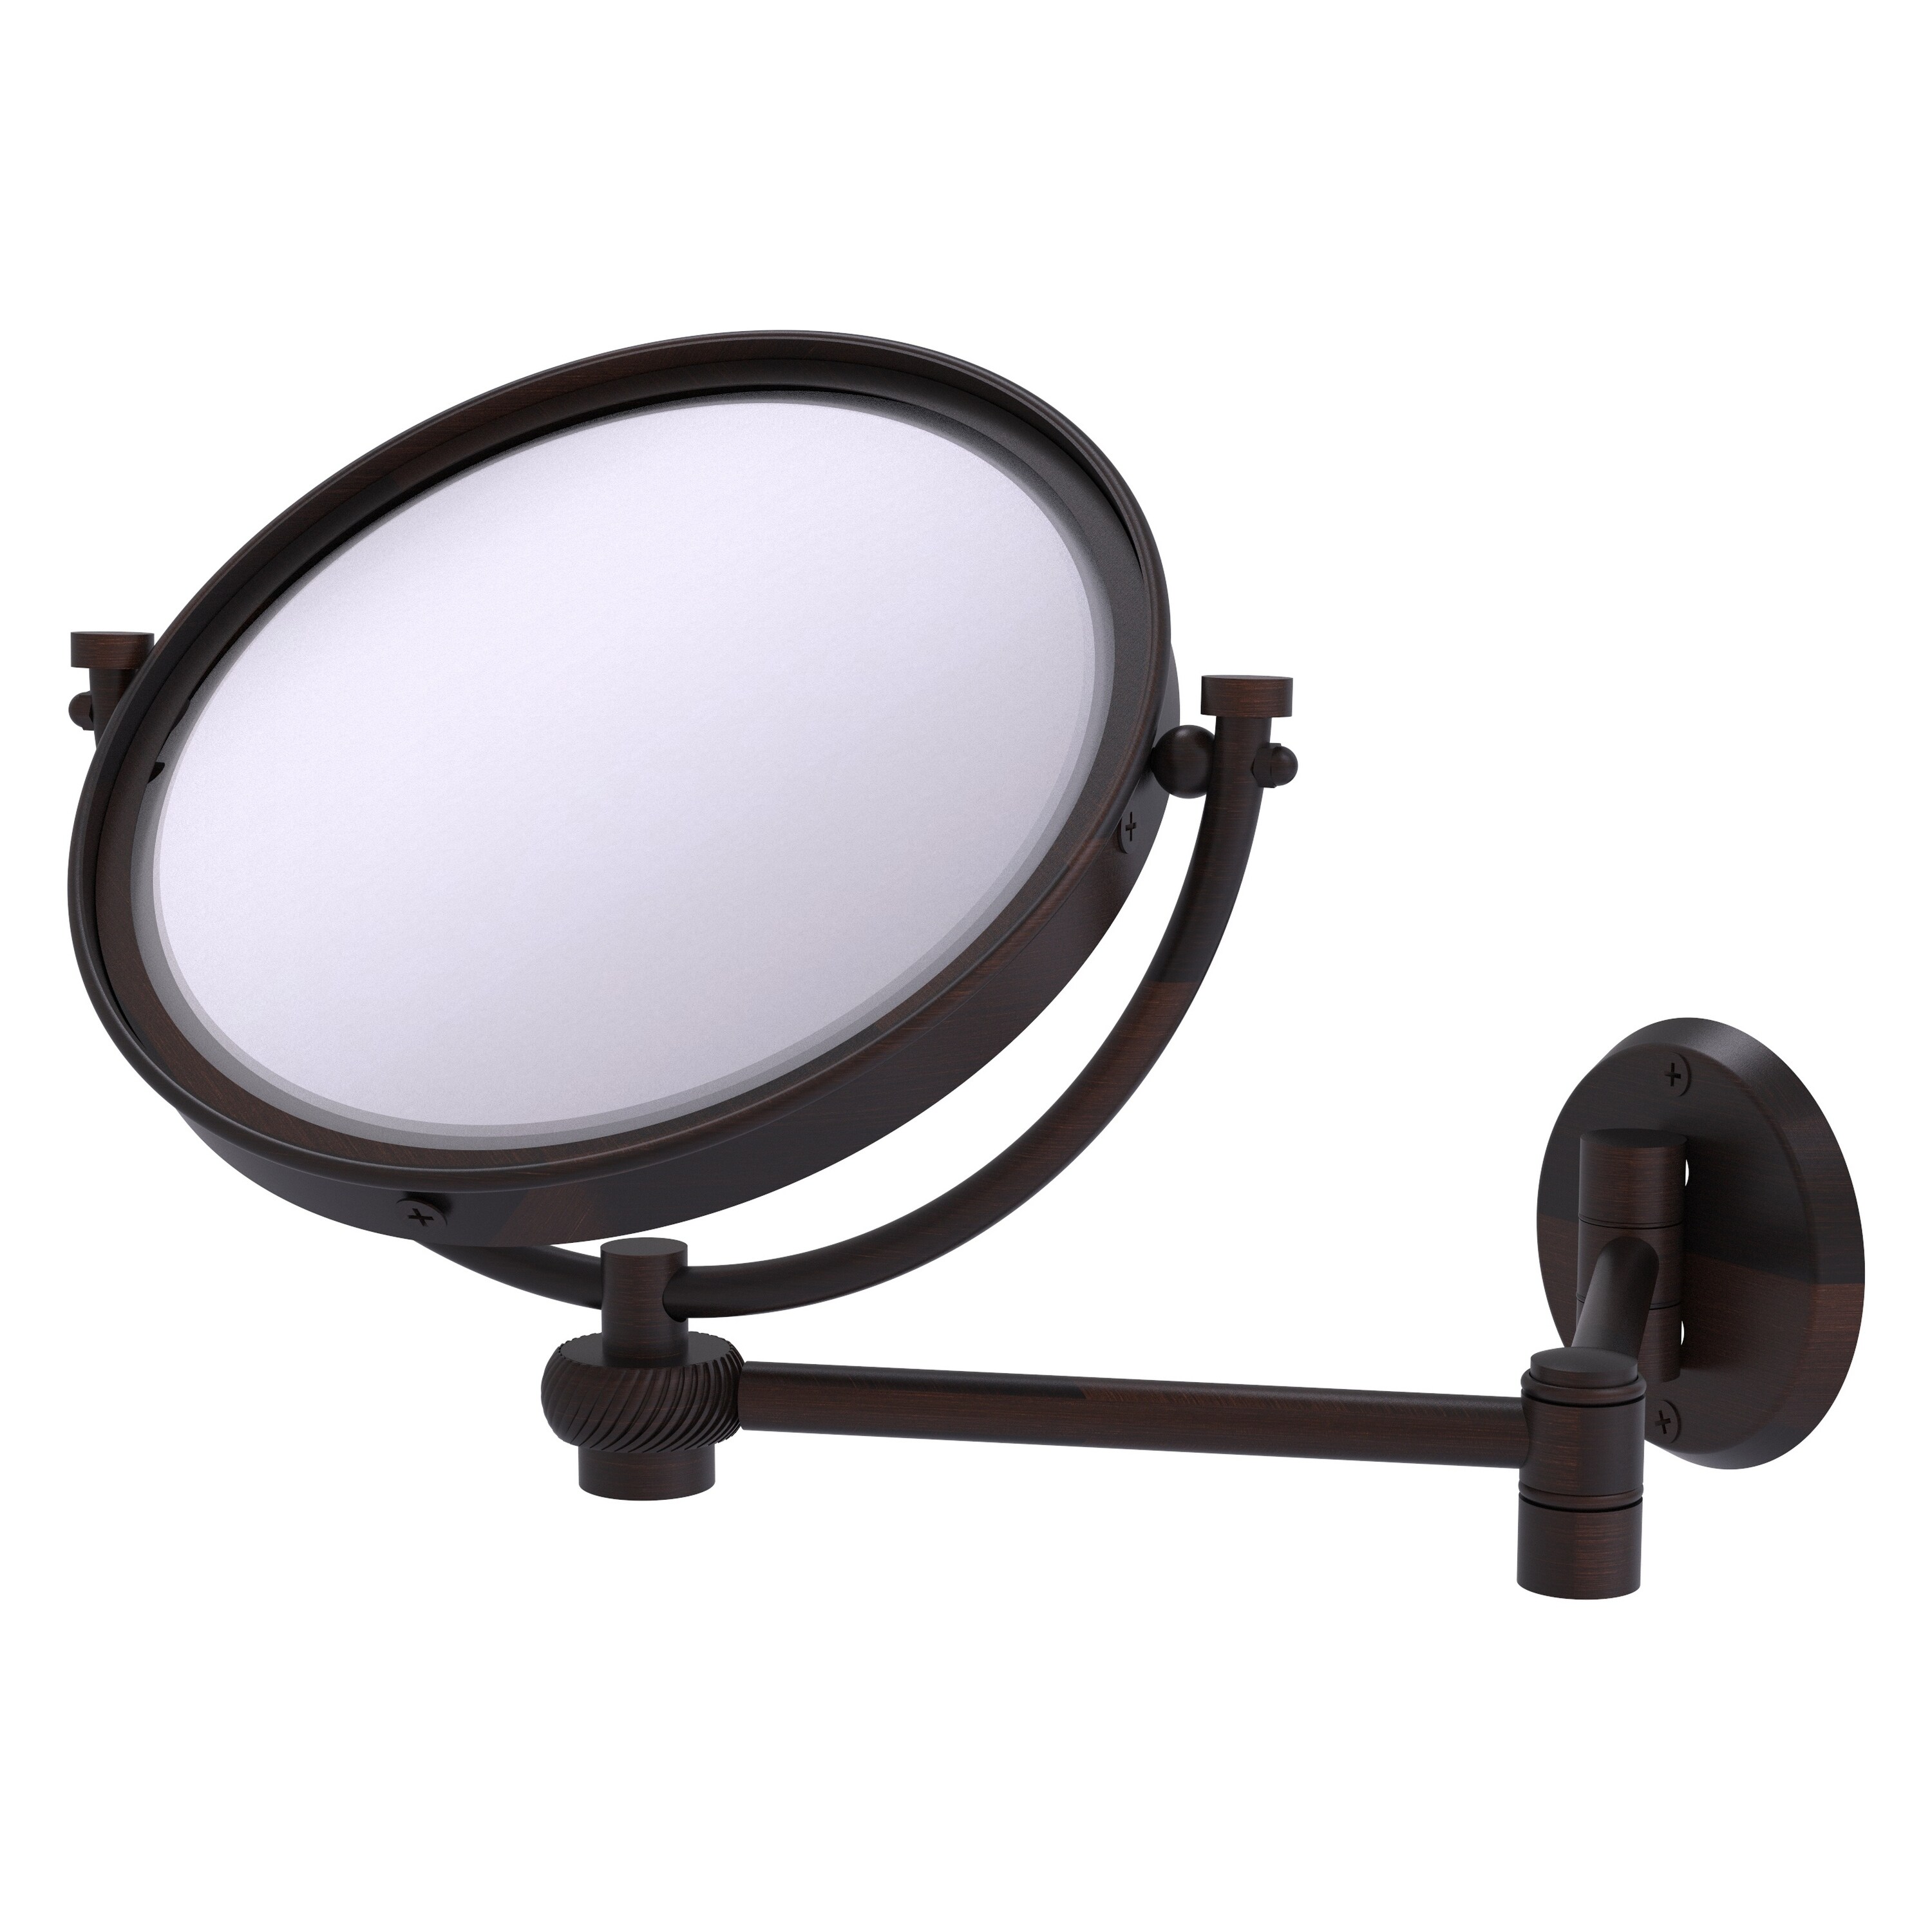 8-in x 10-in Distressed White Double-sided 3X Magnifying Wall-mounted Vanity Mirror | - Allied Brass WM-6T/3X-VB